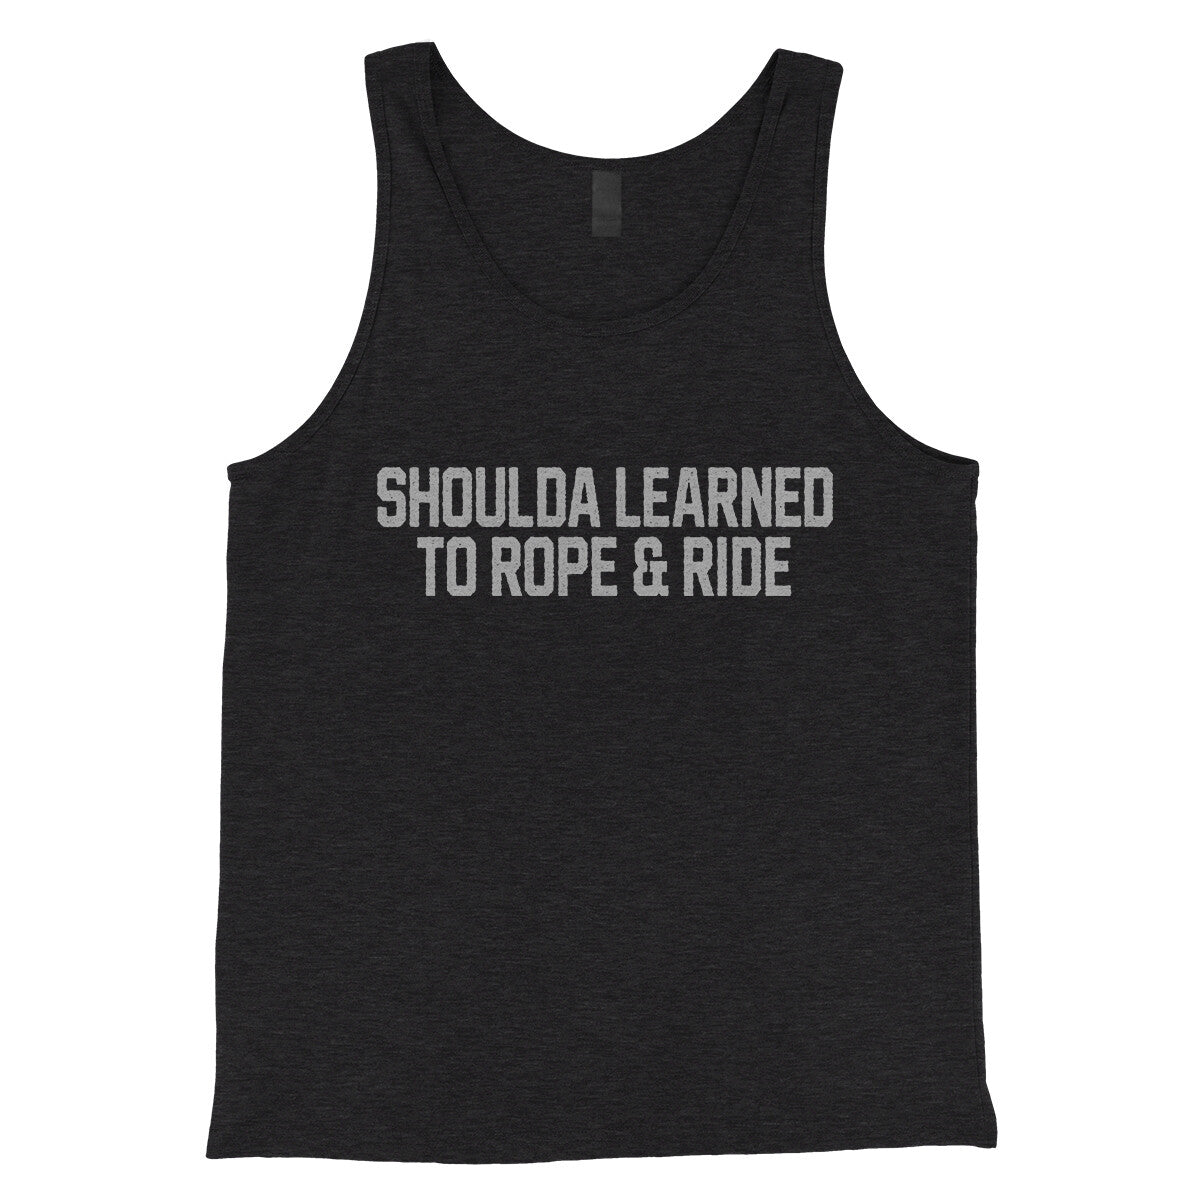 Shoulda Learned to Rope and Ride in Charcoal Black TriBlend Color